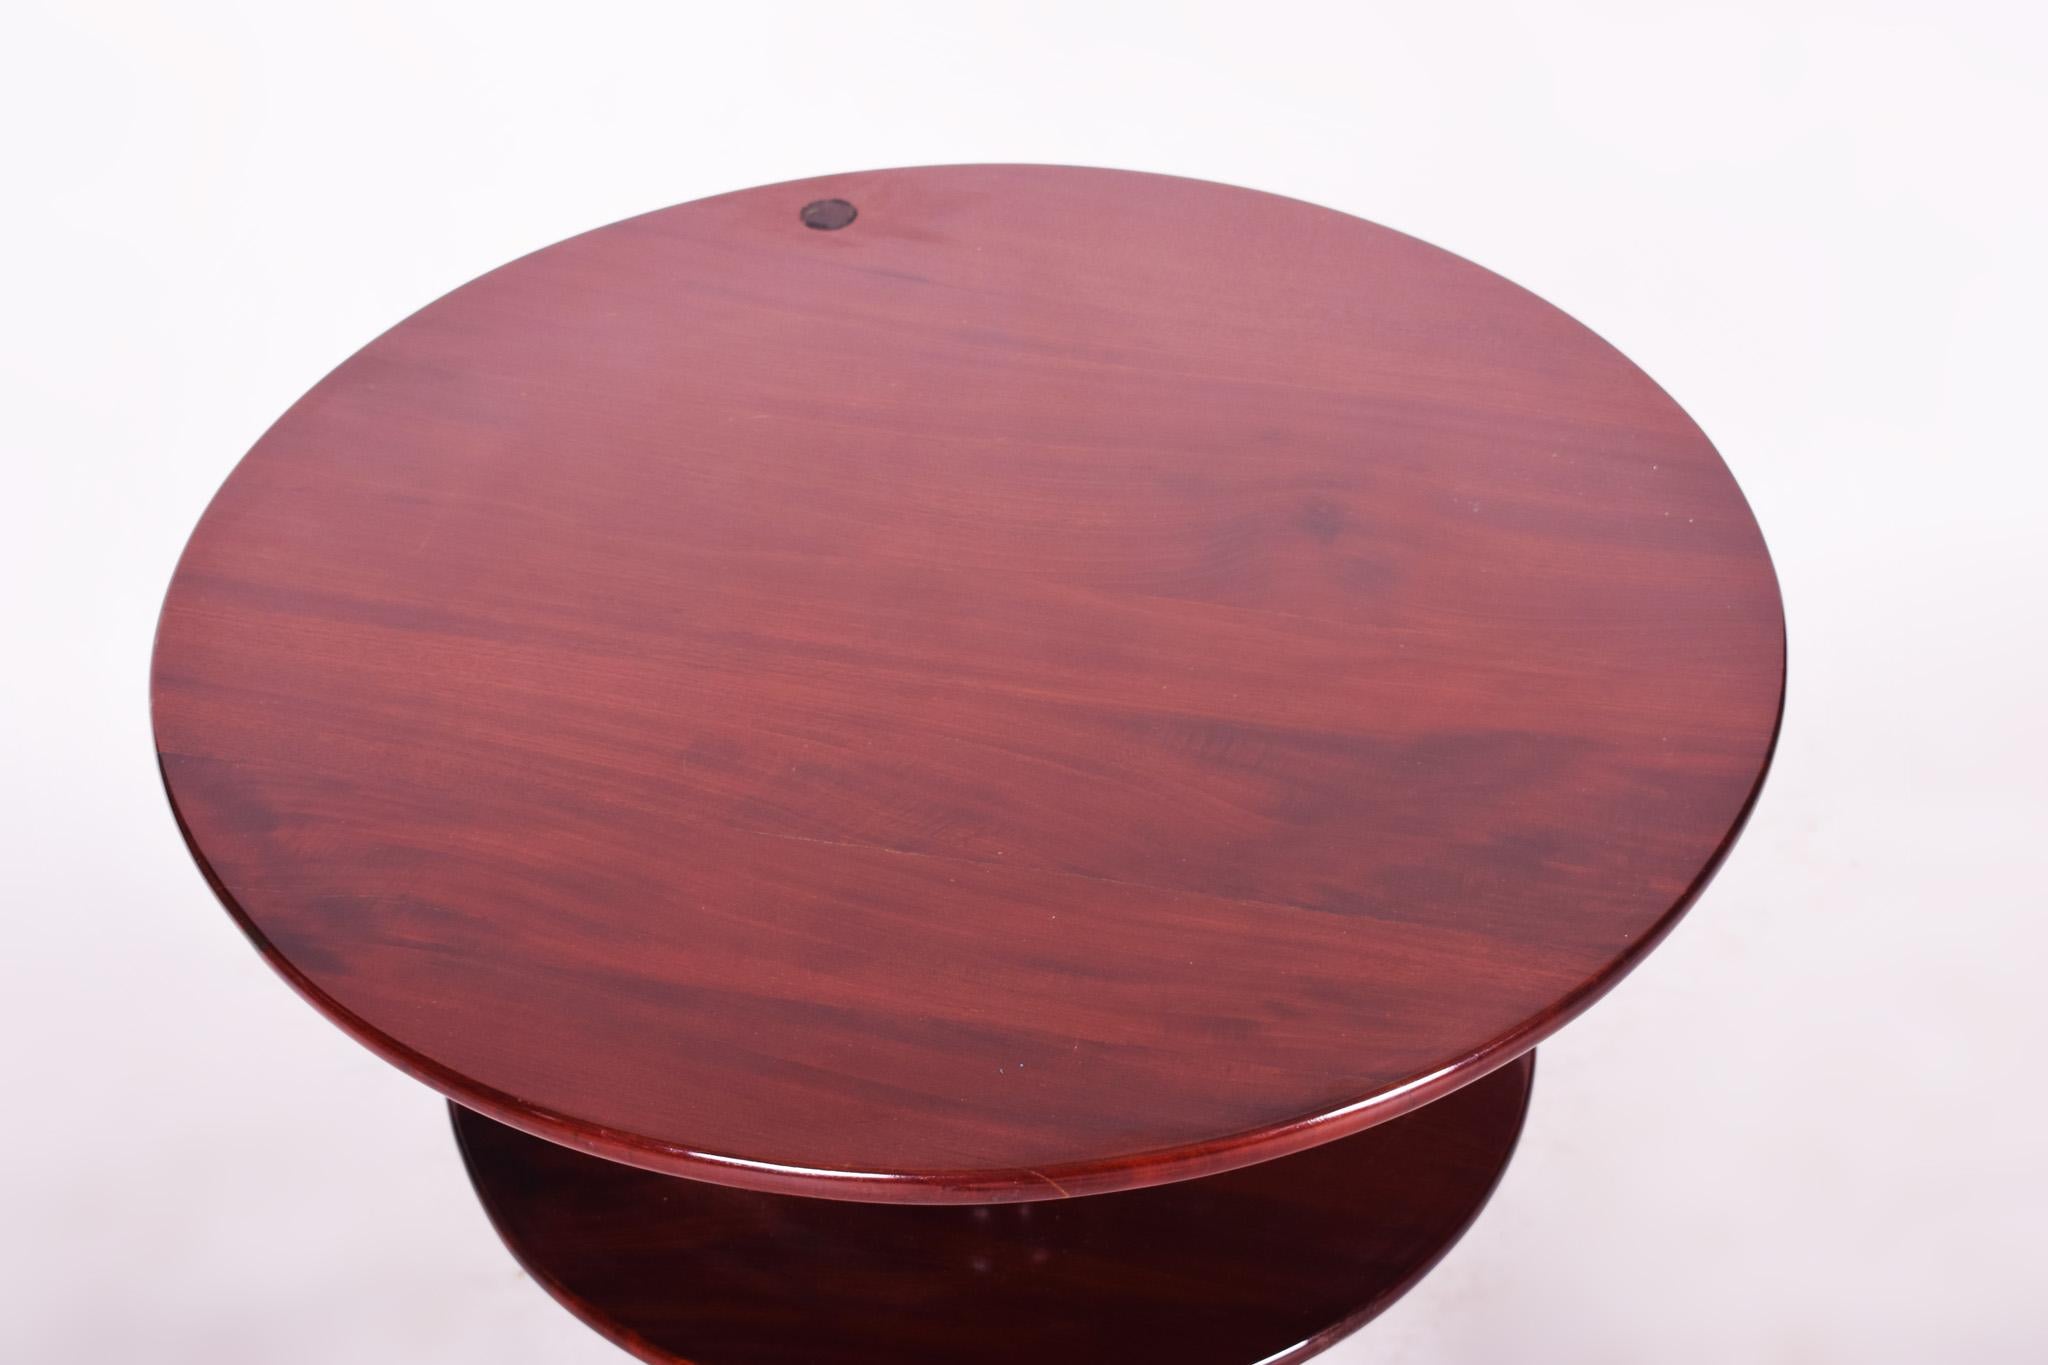 Small Mahogany Historicism Rounded Table, Germany, 1880-1889, High Gloss In Good Condition For Sale In Horomerice, CZ